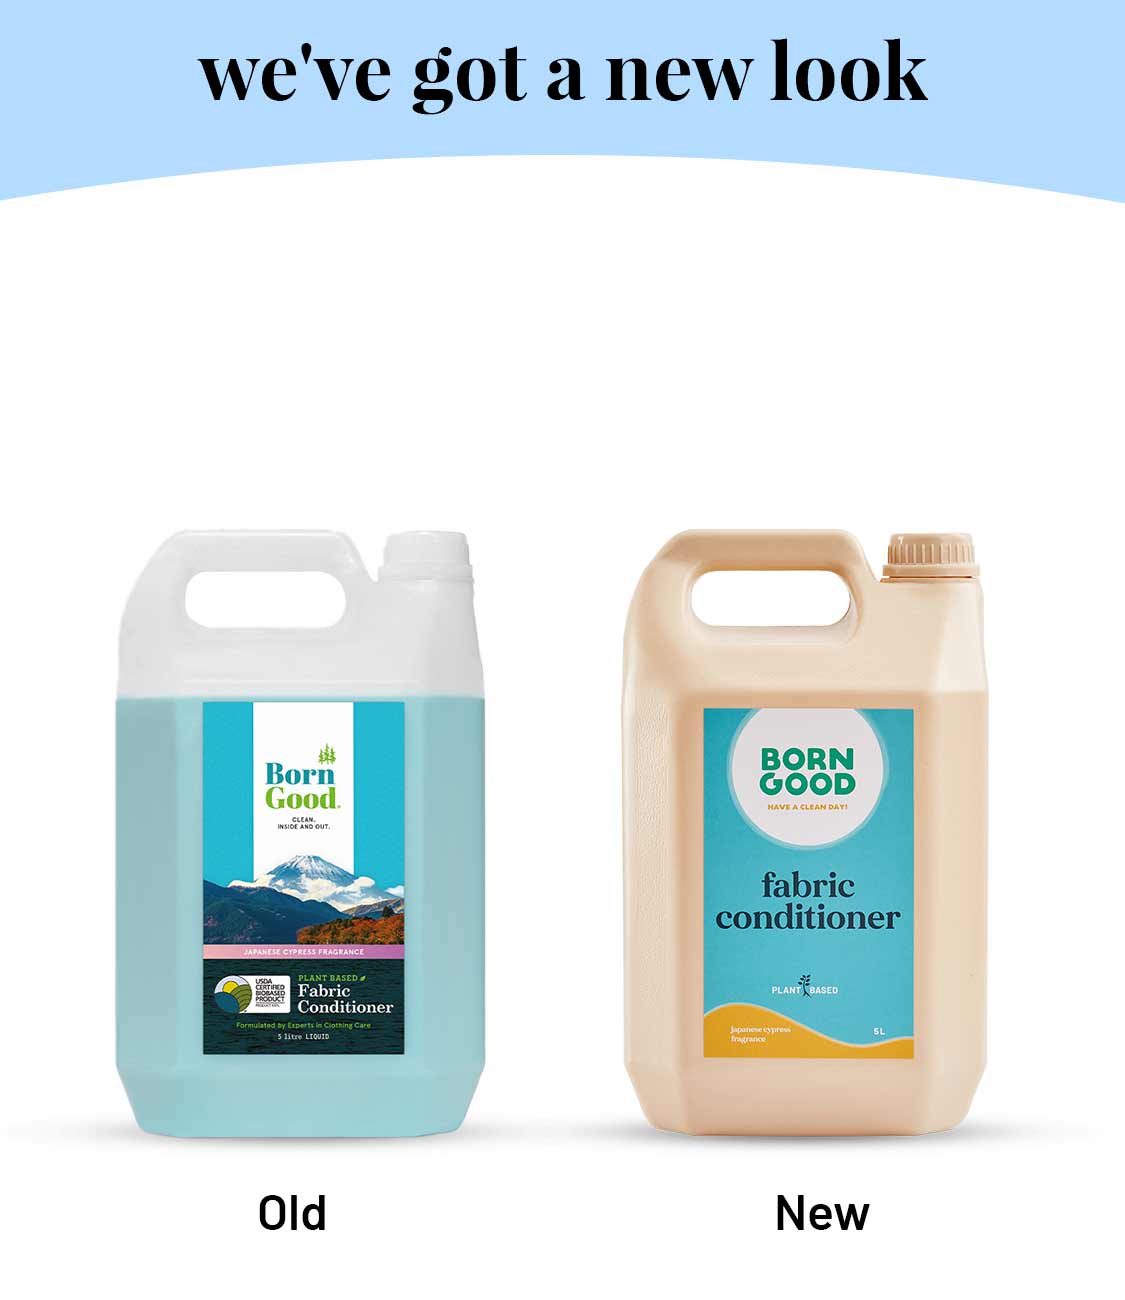 Born Good Plant-based Fabric Conditioner -  5 L Can